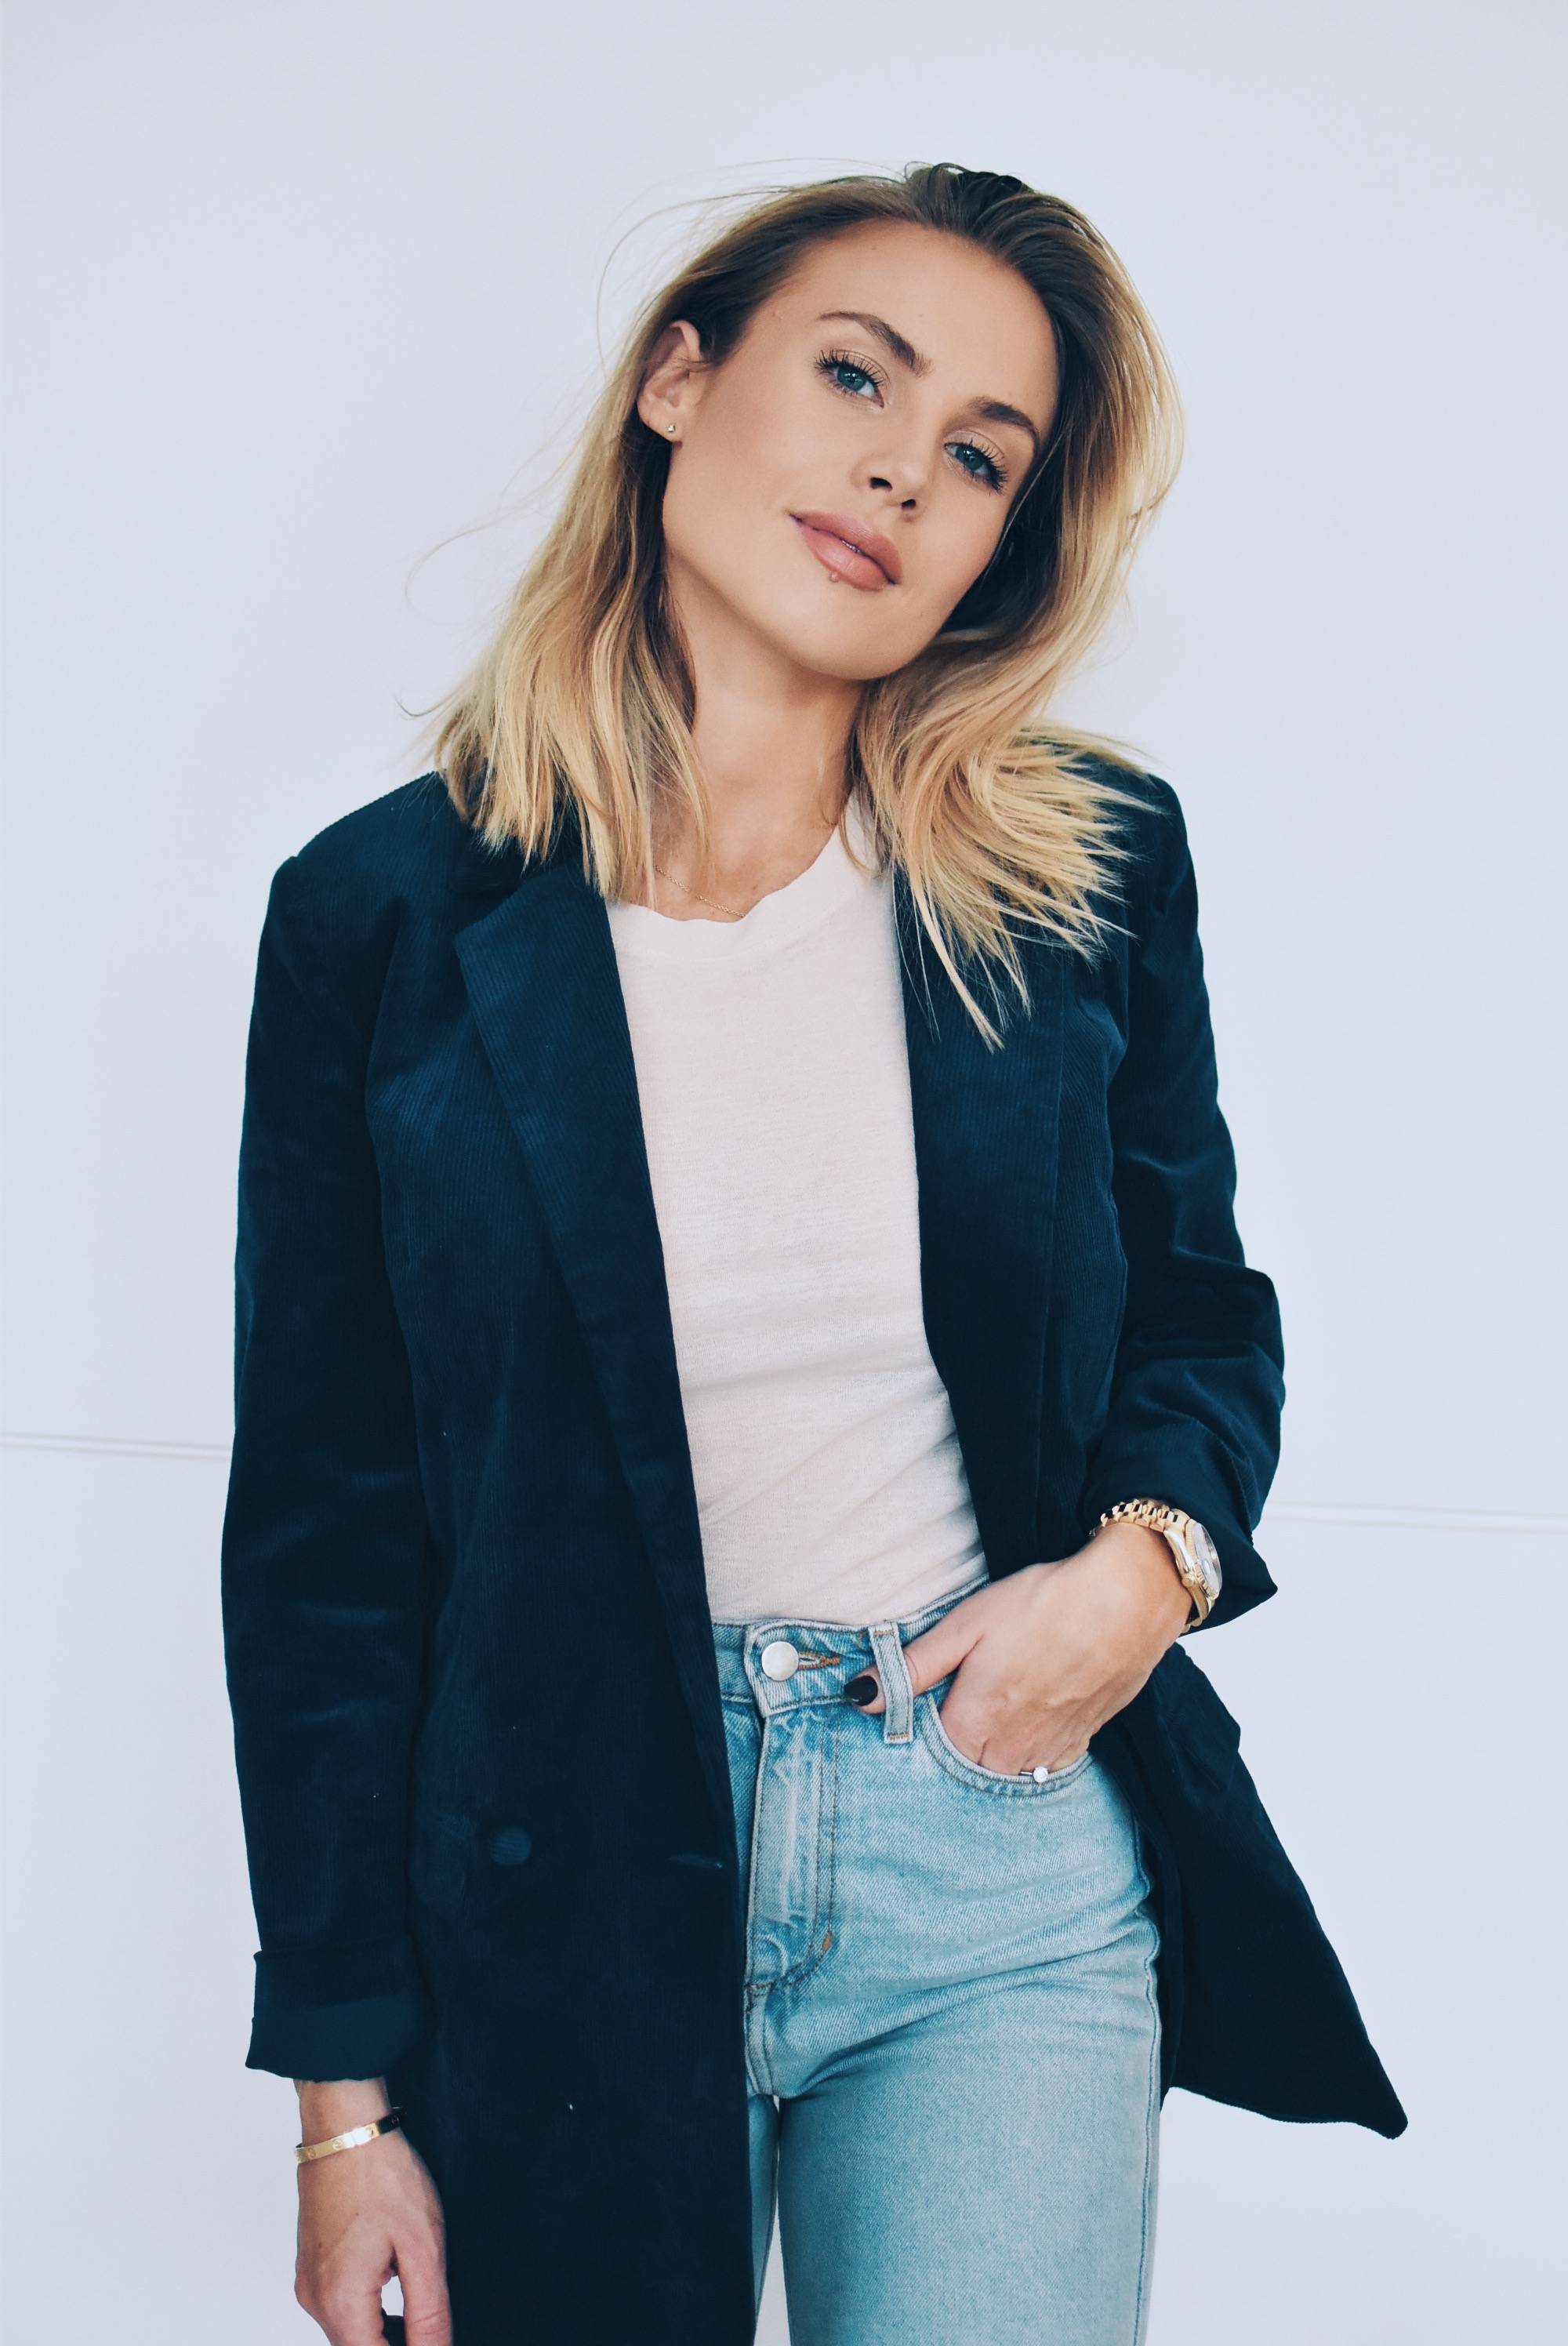 Gorgeous influencer Maja Nilsson looking fab in our Ted Blazer